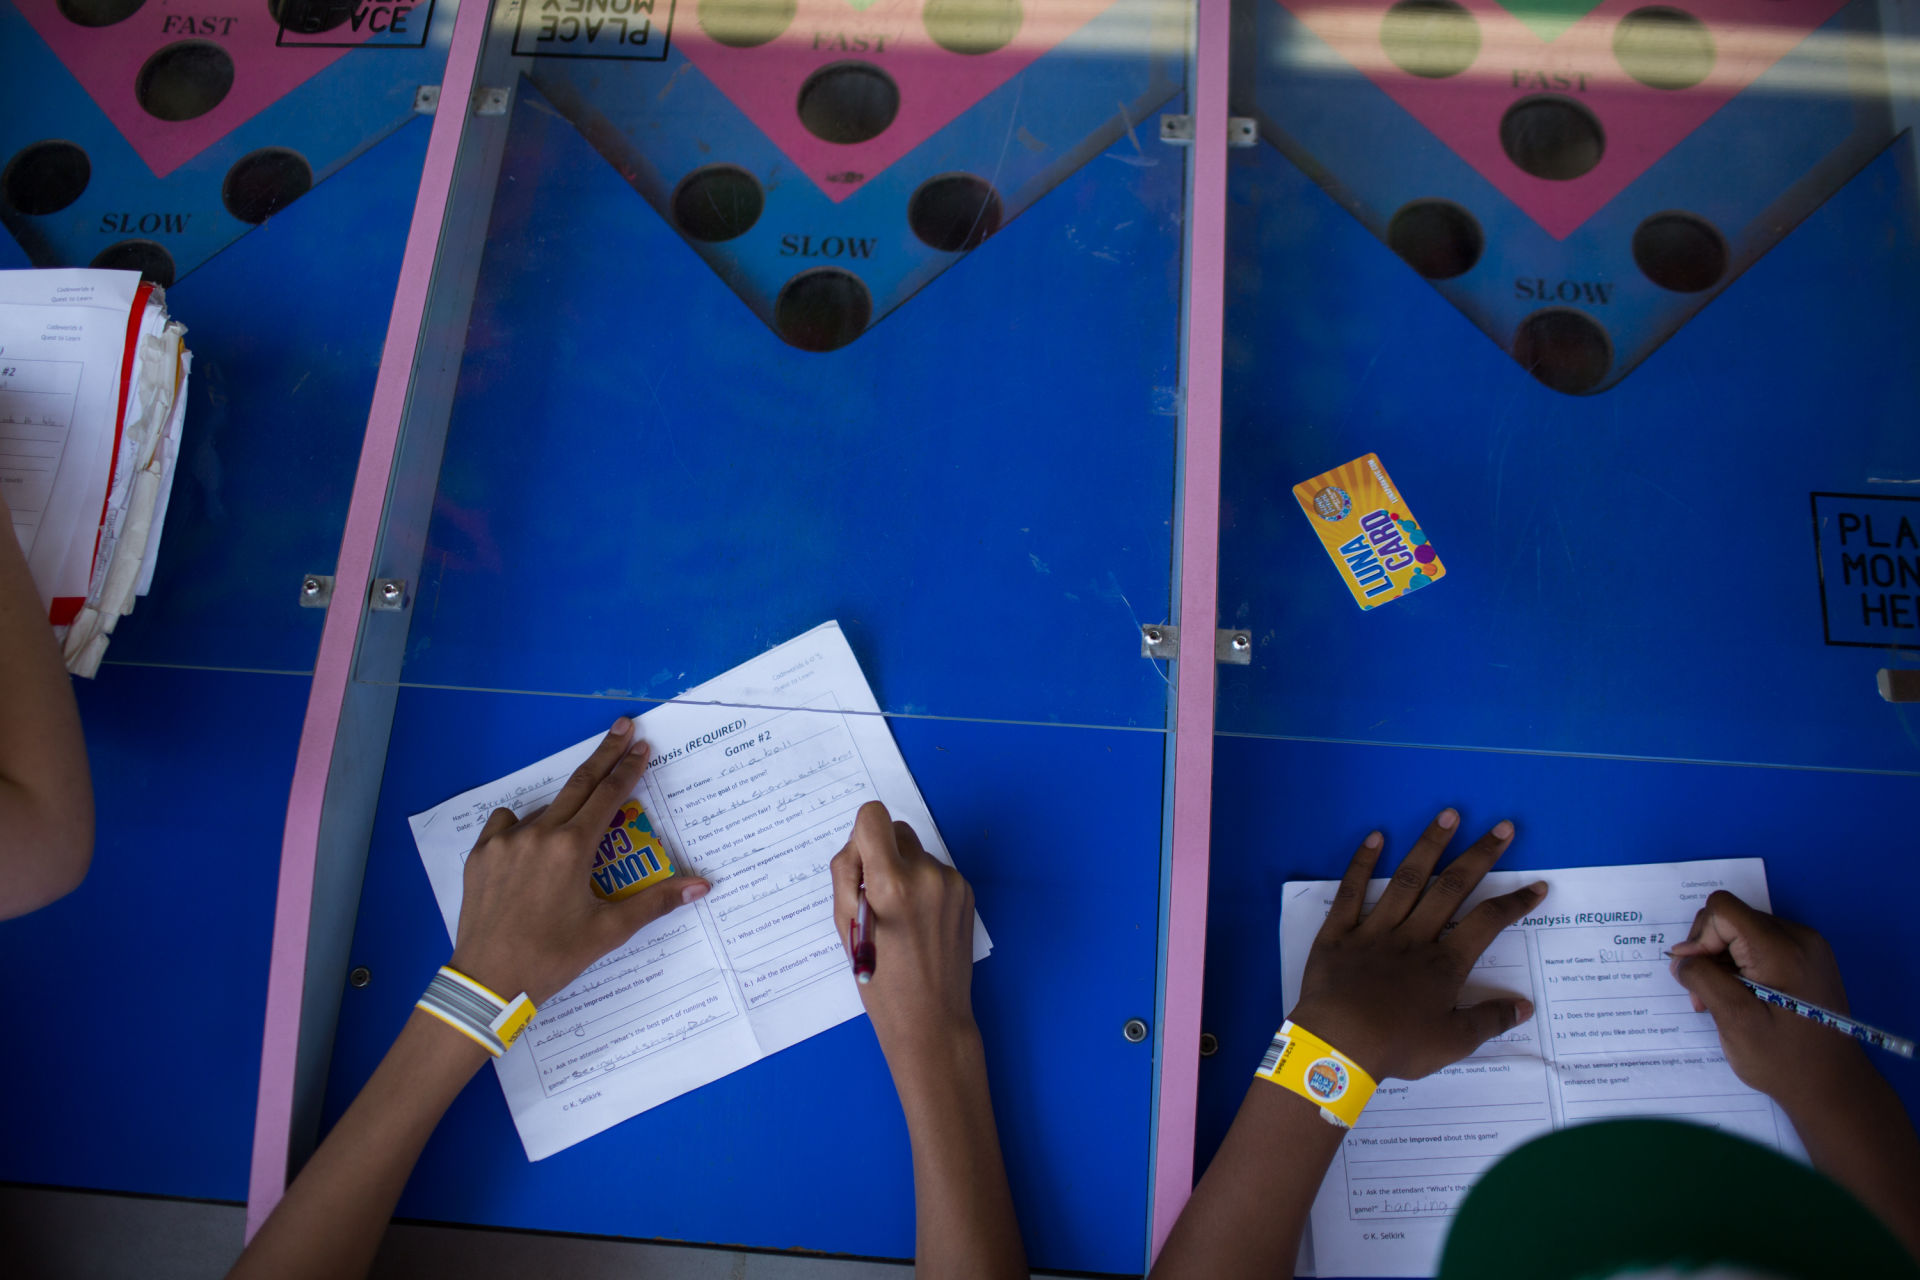 Students fill out games analysis worksheets at the Roll-A-Ball game during a trip to Coney Island in Brooklyn, NY May 28, 2015. The group of students from Quest to Learn School took the day trip to Coney Island to analyze user experience on games and rides at Luna Park as part of  their late-spring school curriculum. 